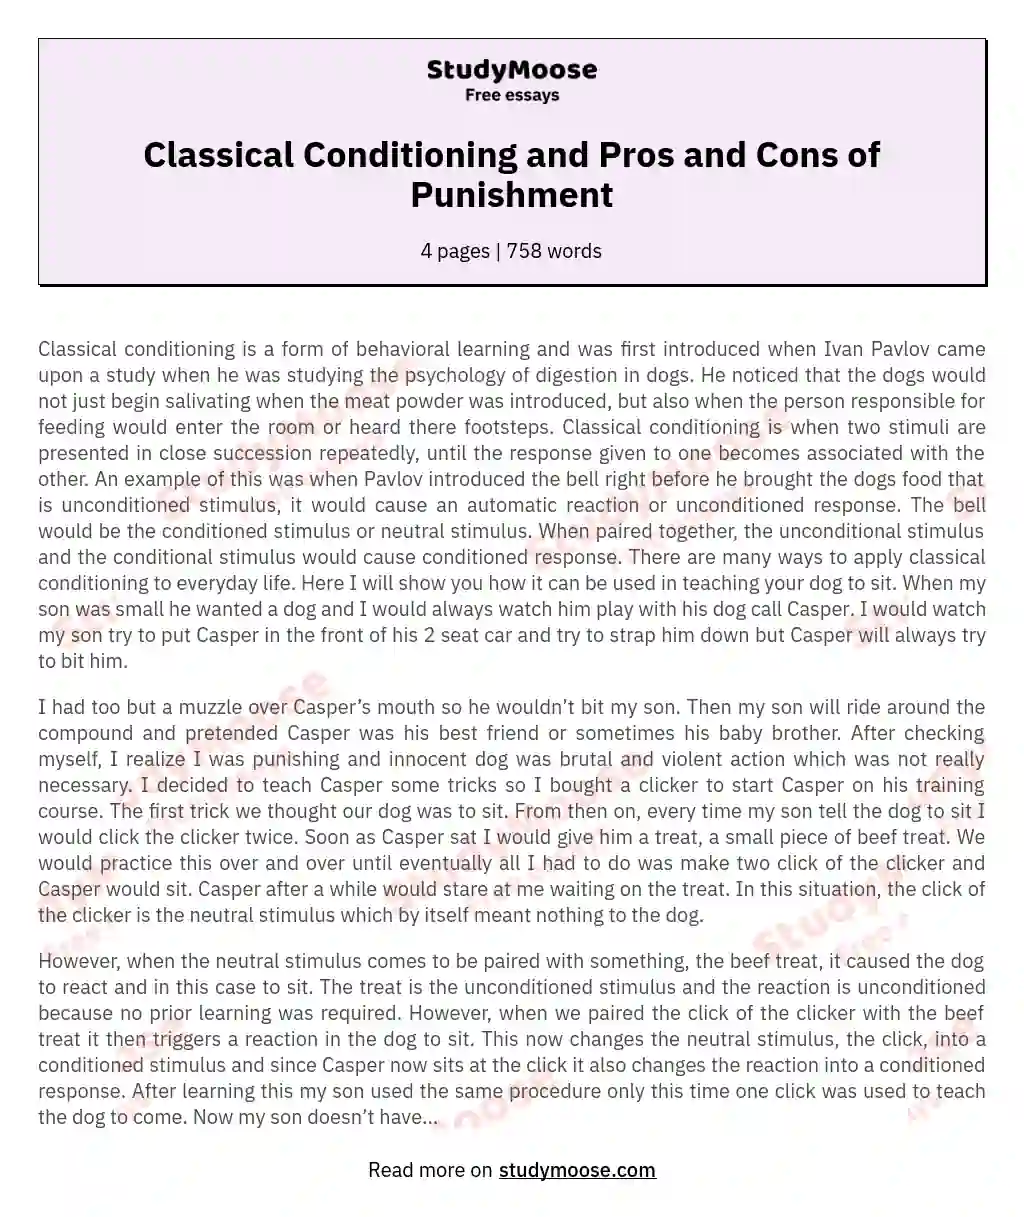 Classical Conditioning and Pros and Cons of Punishment